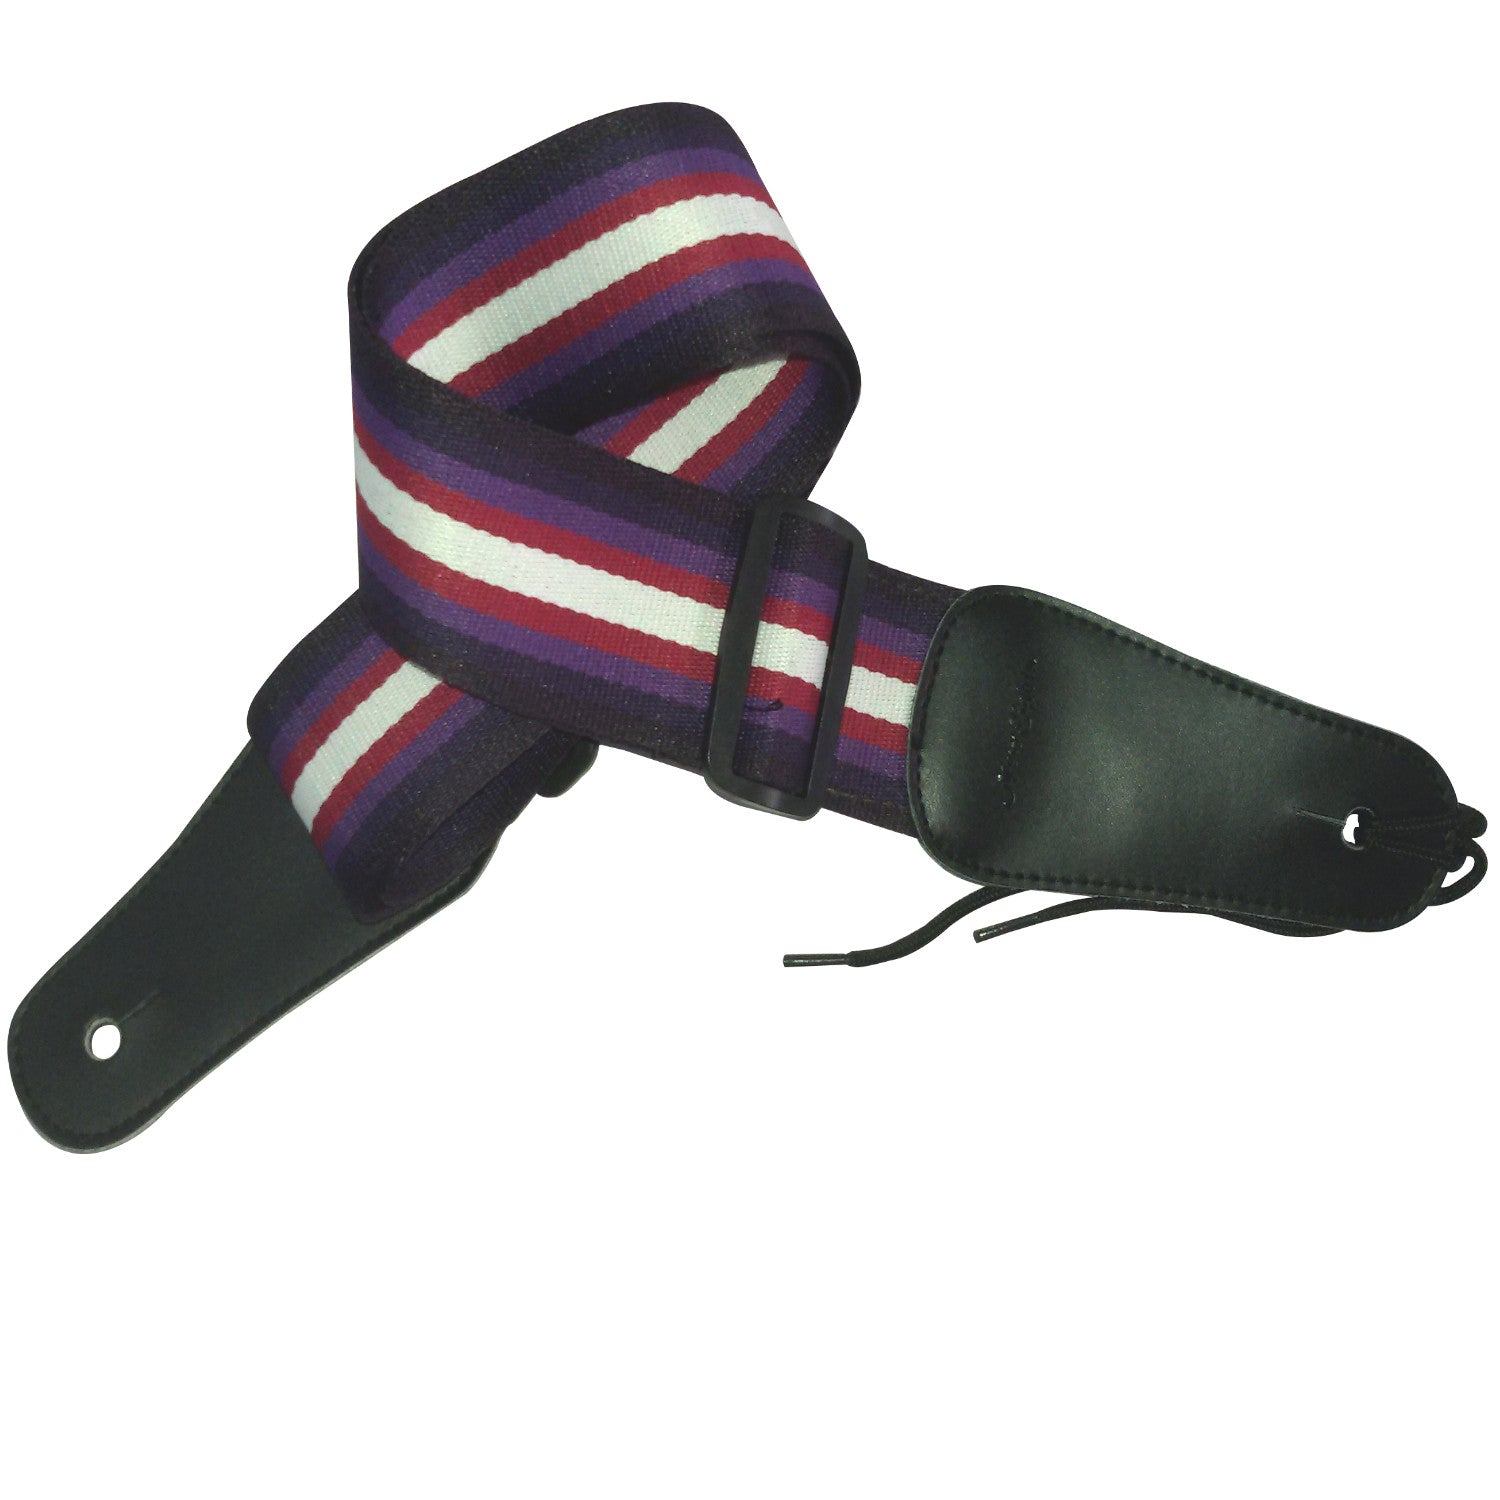 NewEights Purple Cotton Guitar Strap with Leather Ends - Adjustable Length - Great Cool Guitar Gifts